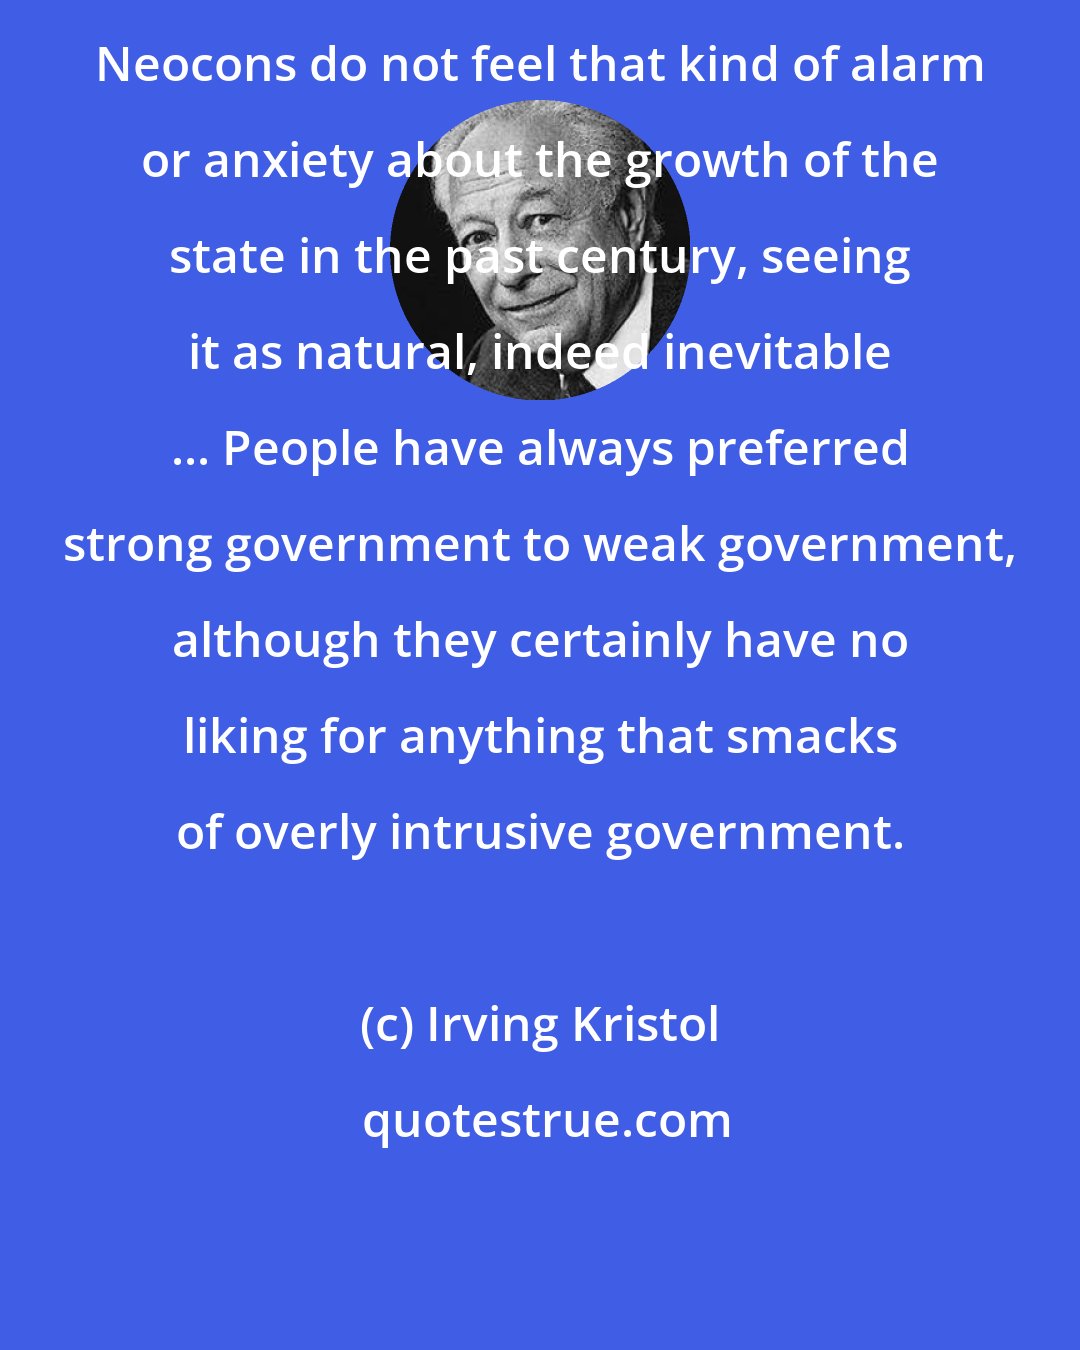 Irving Kristol: Neocons do not feel that kind of alarm or anxiety about the growth of the state in the past century, seeing it as natural, indeed inevitable ... People have always preferred strong government to weak government, although they certainly have no liking for anything that smacks of overly intrusive government.